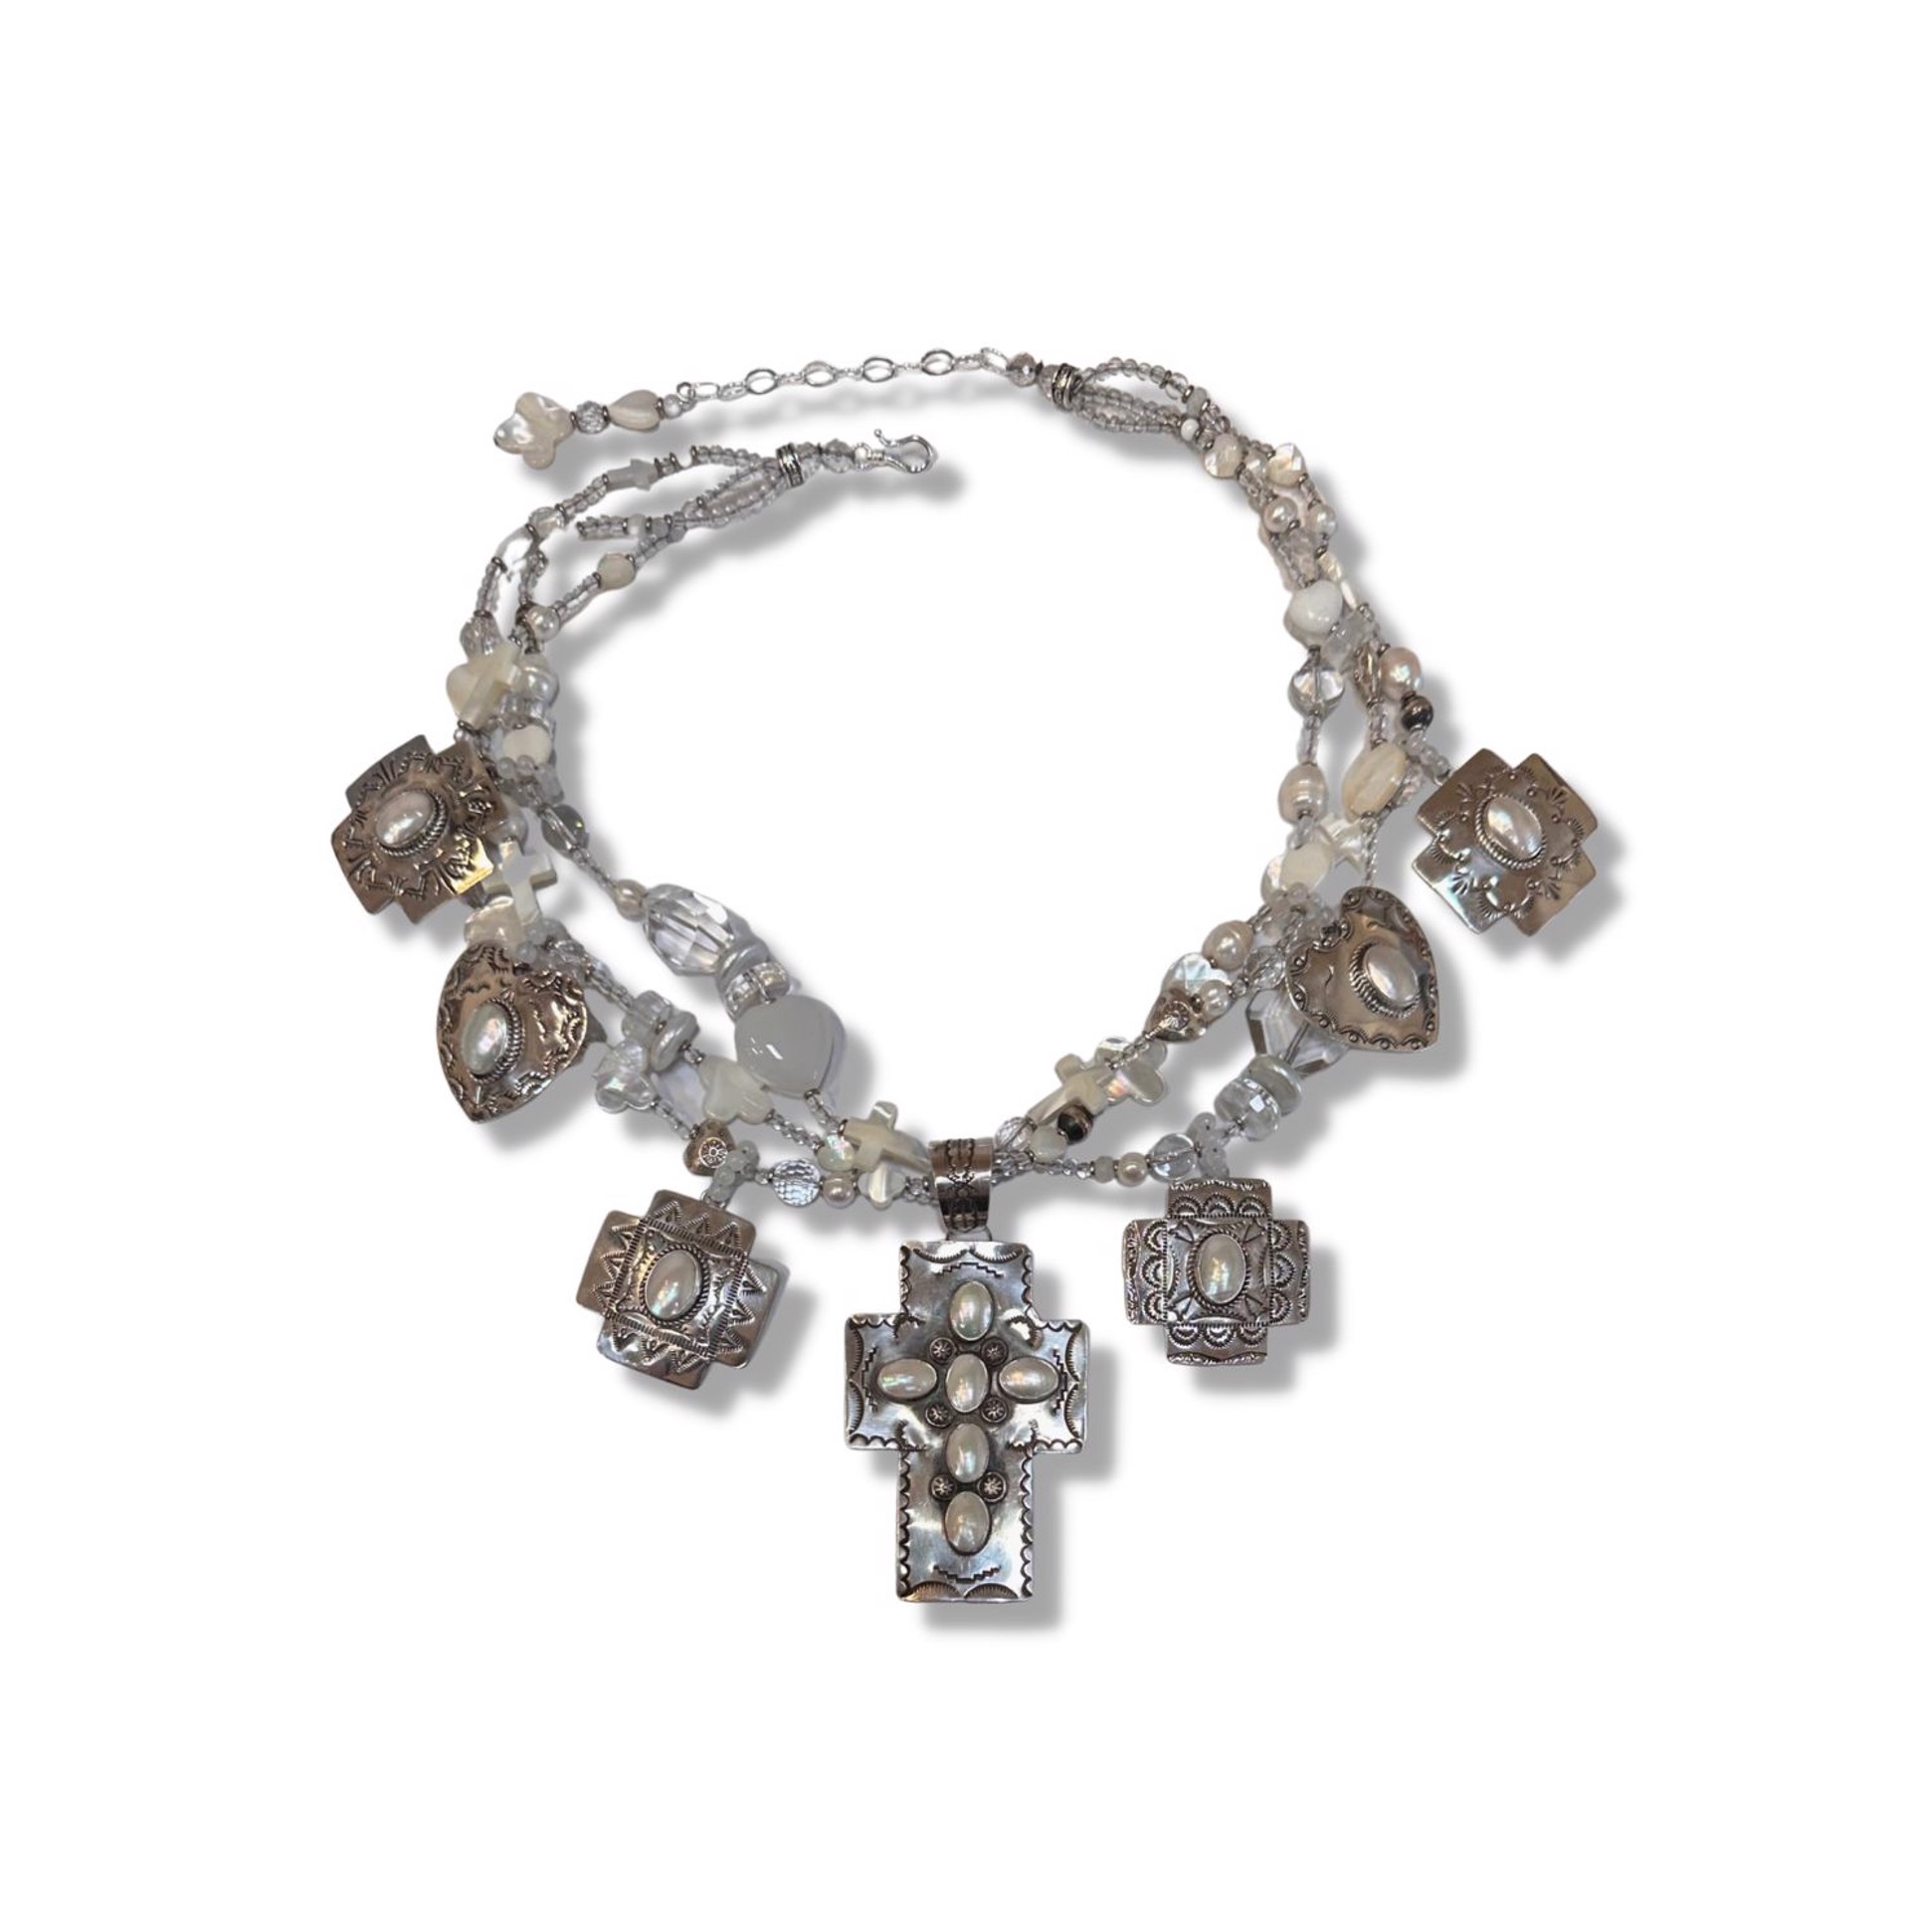 KY 1486 Three strand Pearl, Rock Crystal, Sterling Silver, and Mother of Pearl Necklace by Kim Yubeta